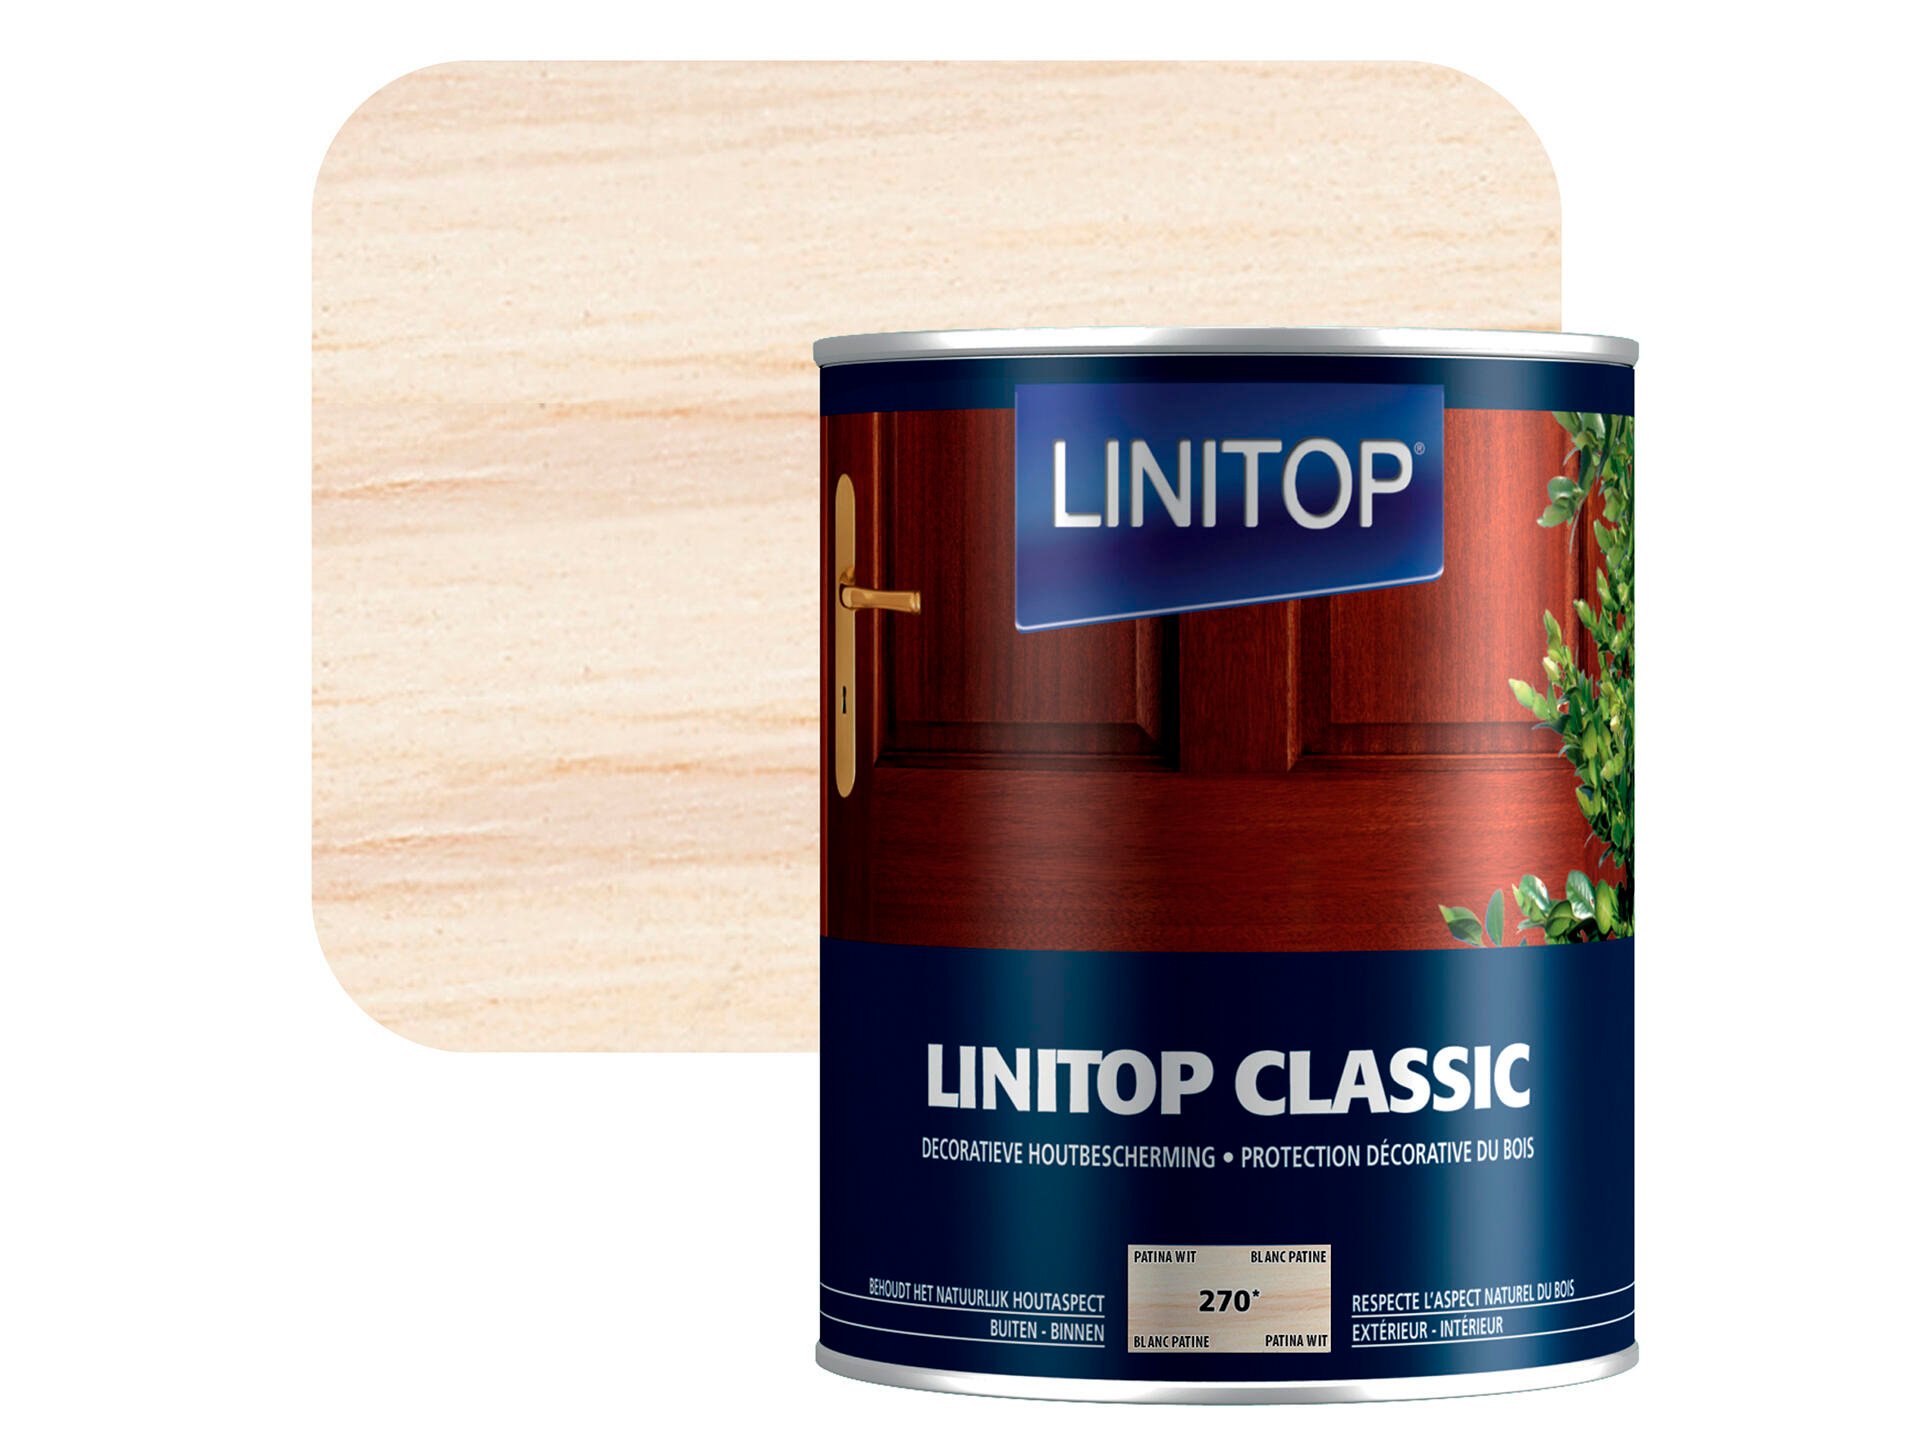 Linitop houtbeits 1l patina wit #270